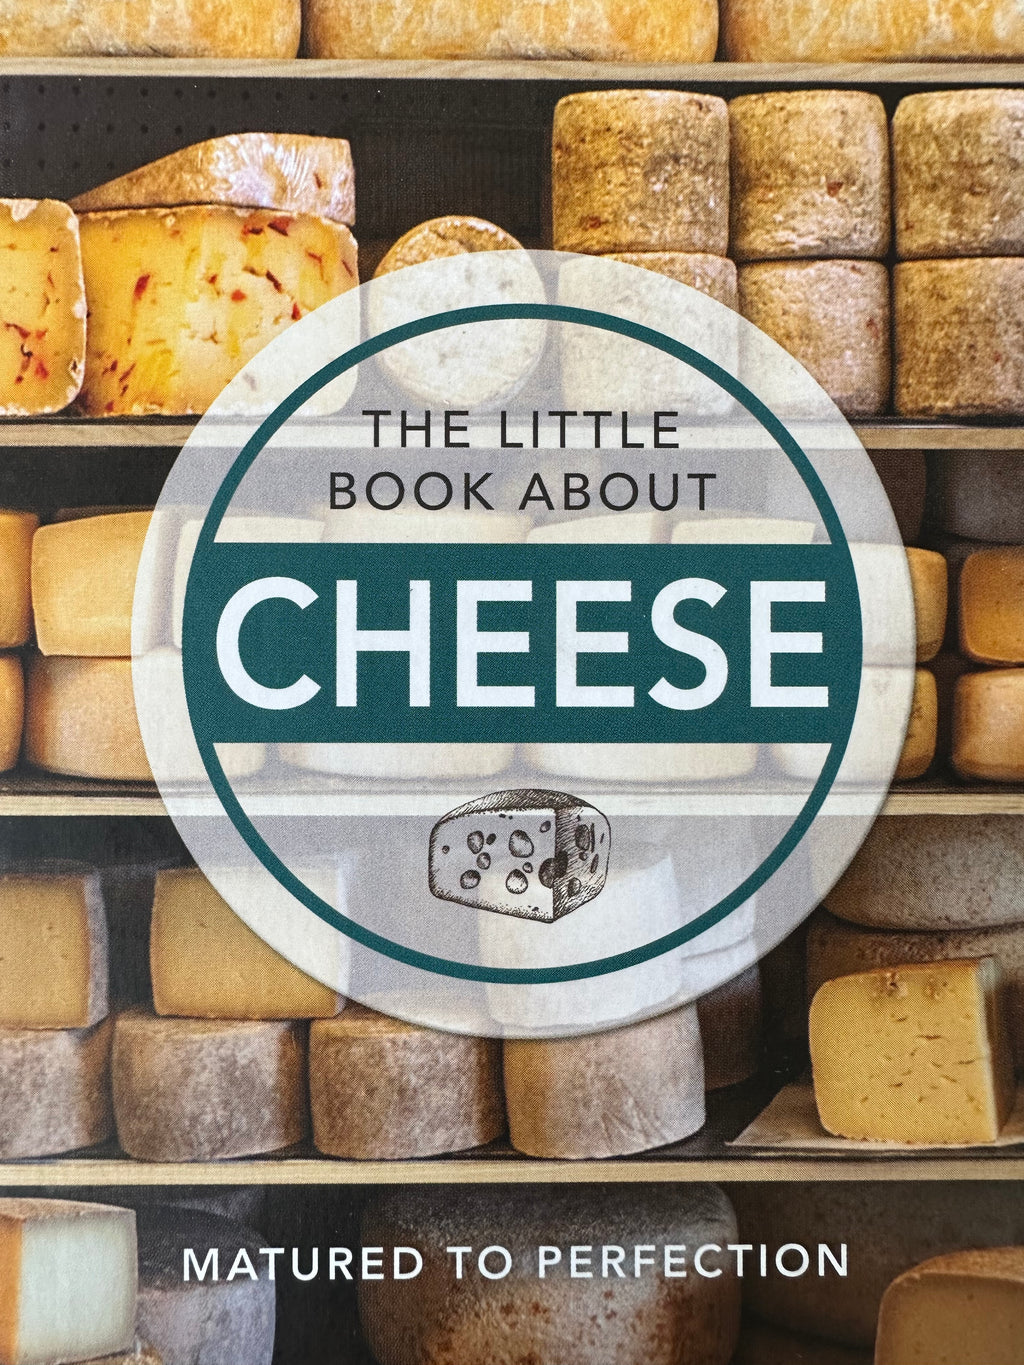 The little book about cheese